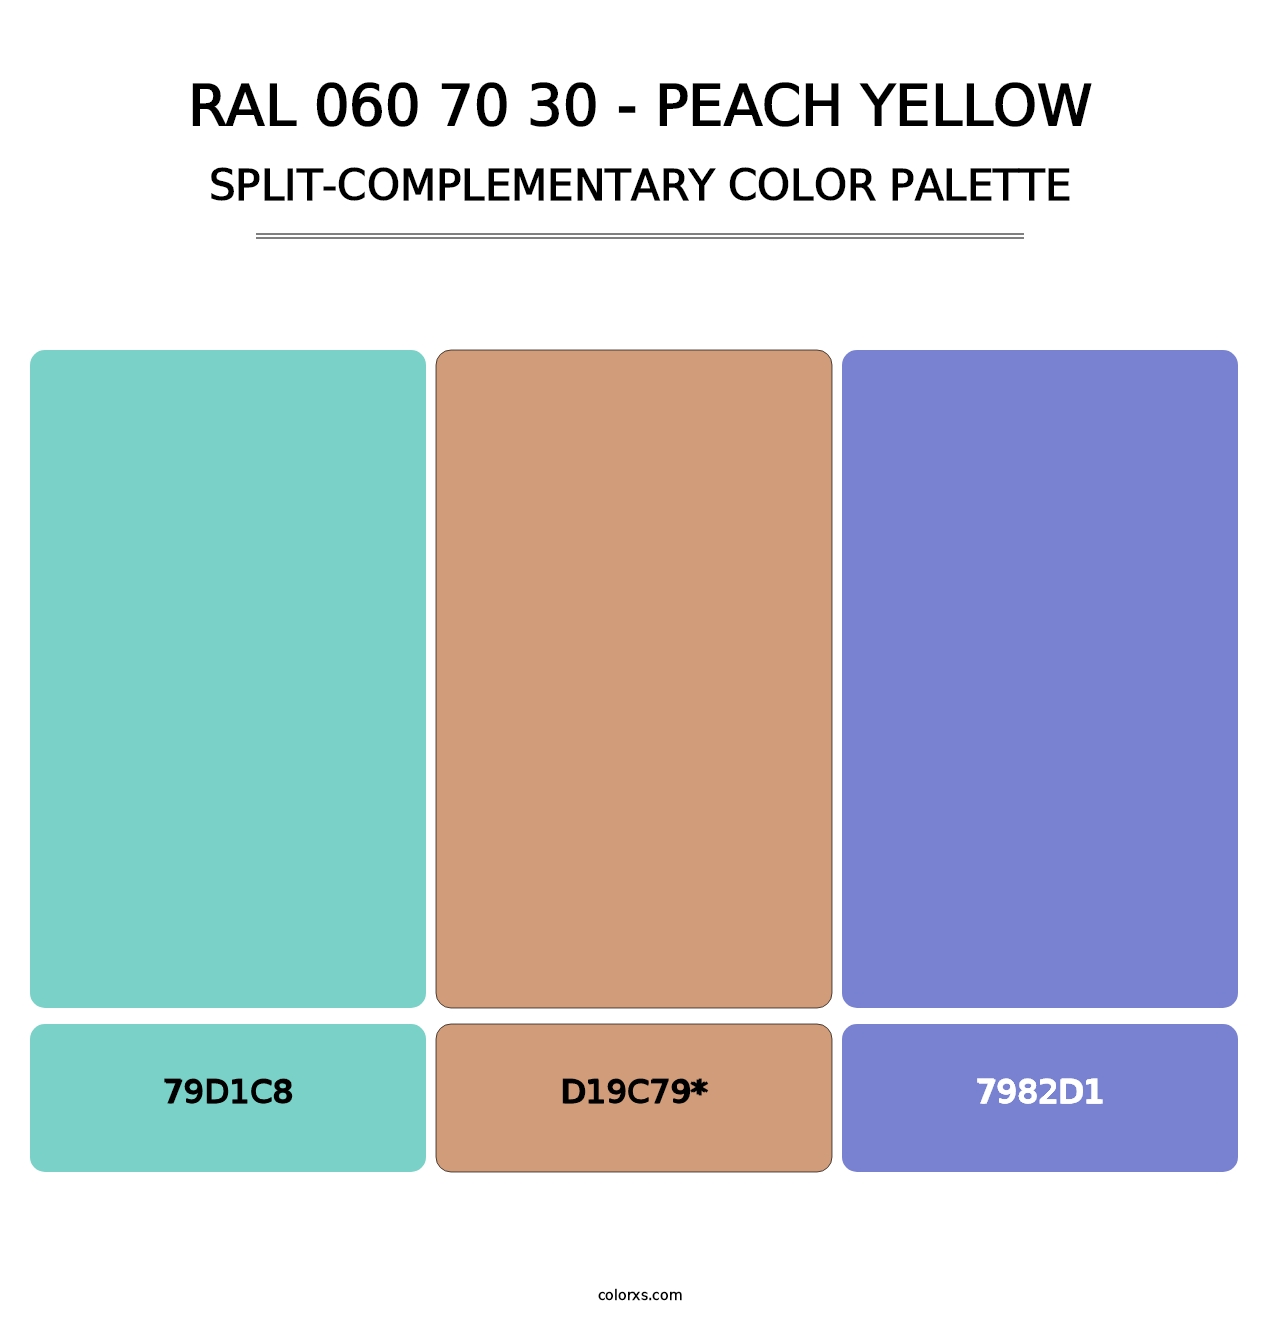 RAL 060 70 30 - Peach Yellow - Split-Complementary Color Palette